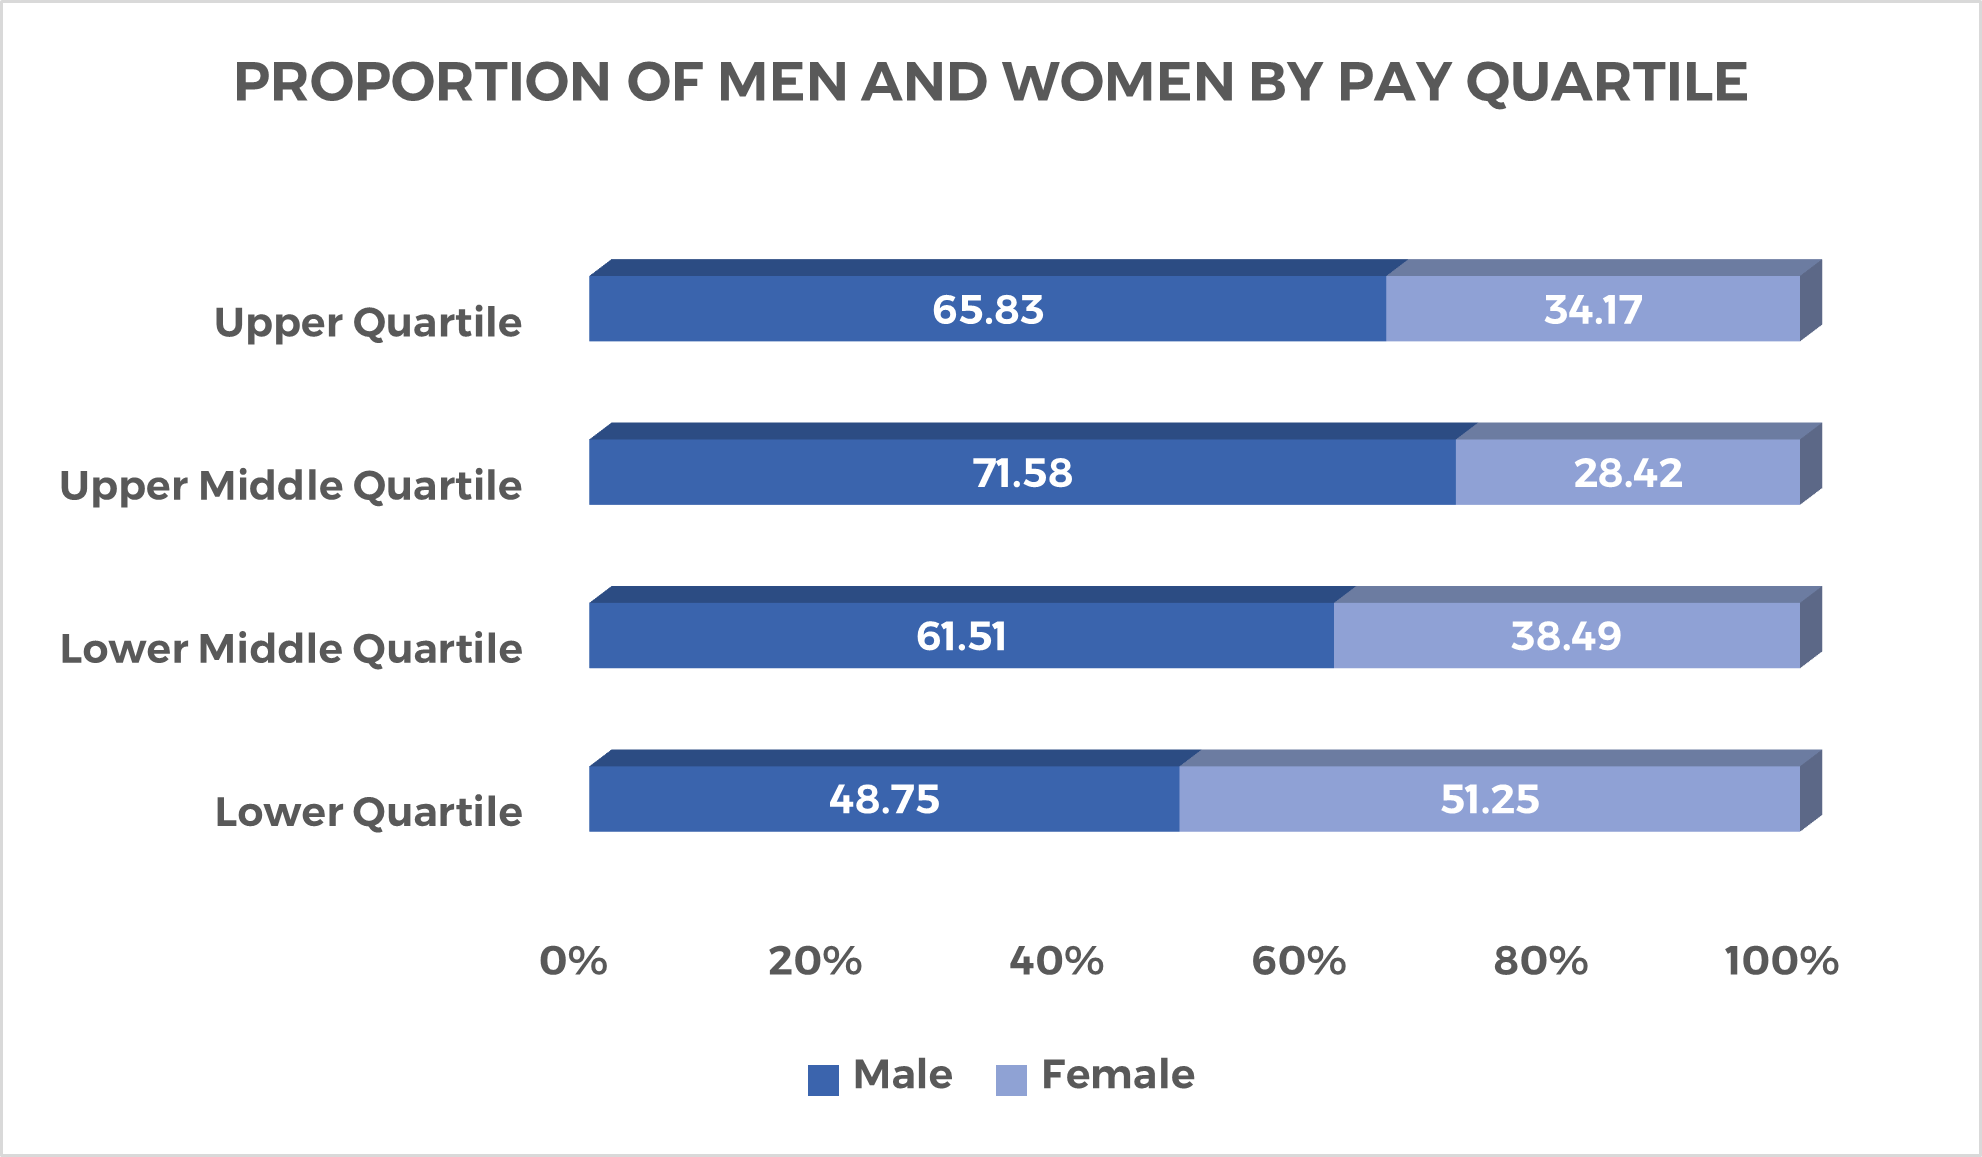 Proportion of men and women by quartile - Zenith group 2022